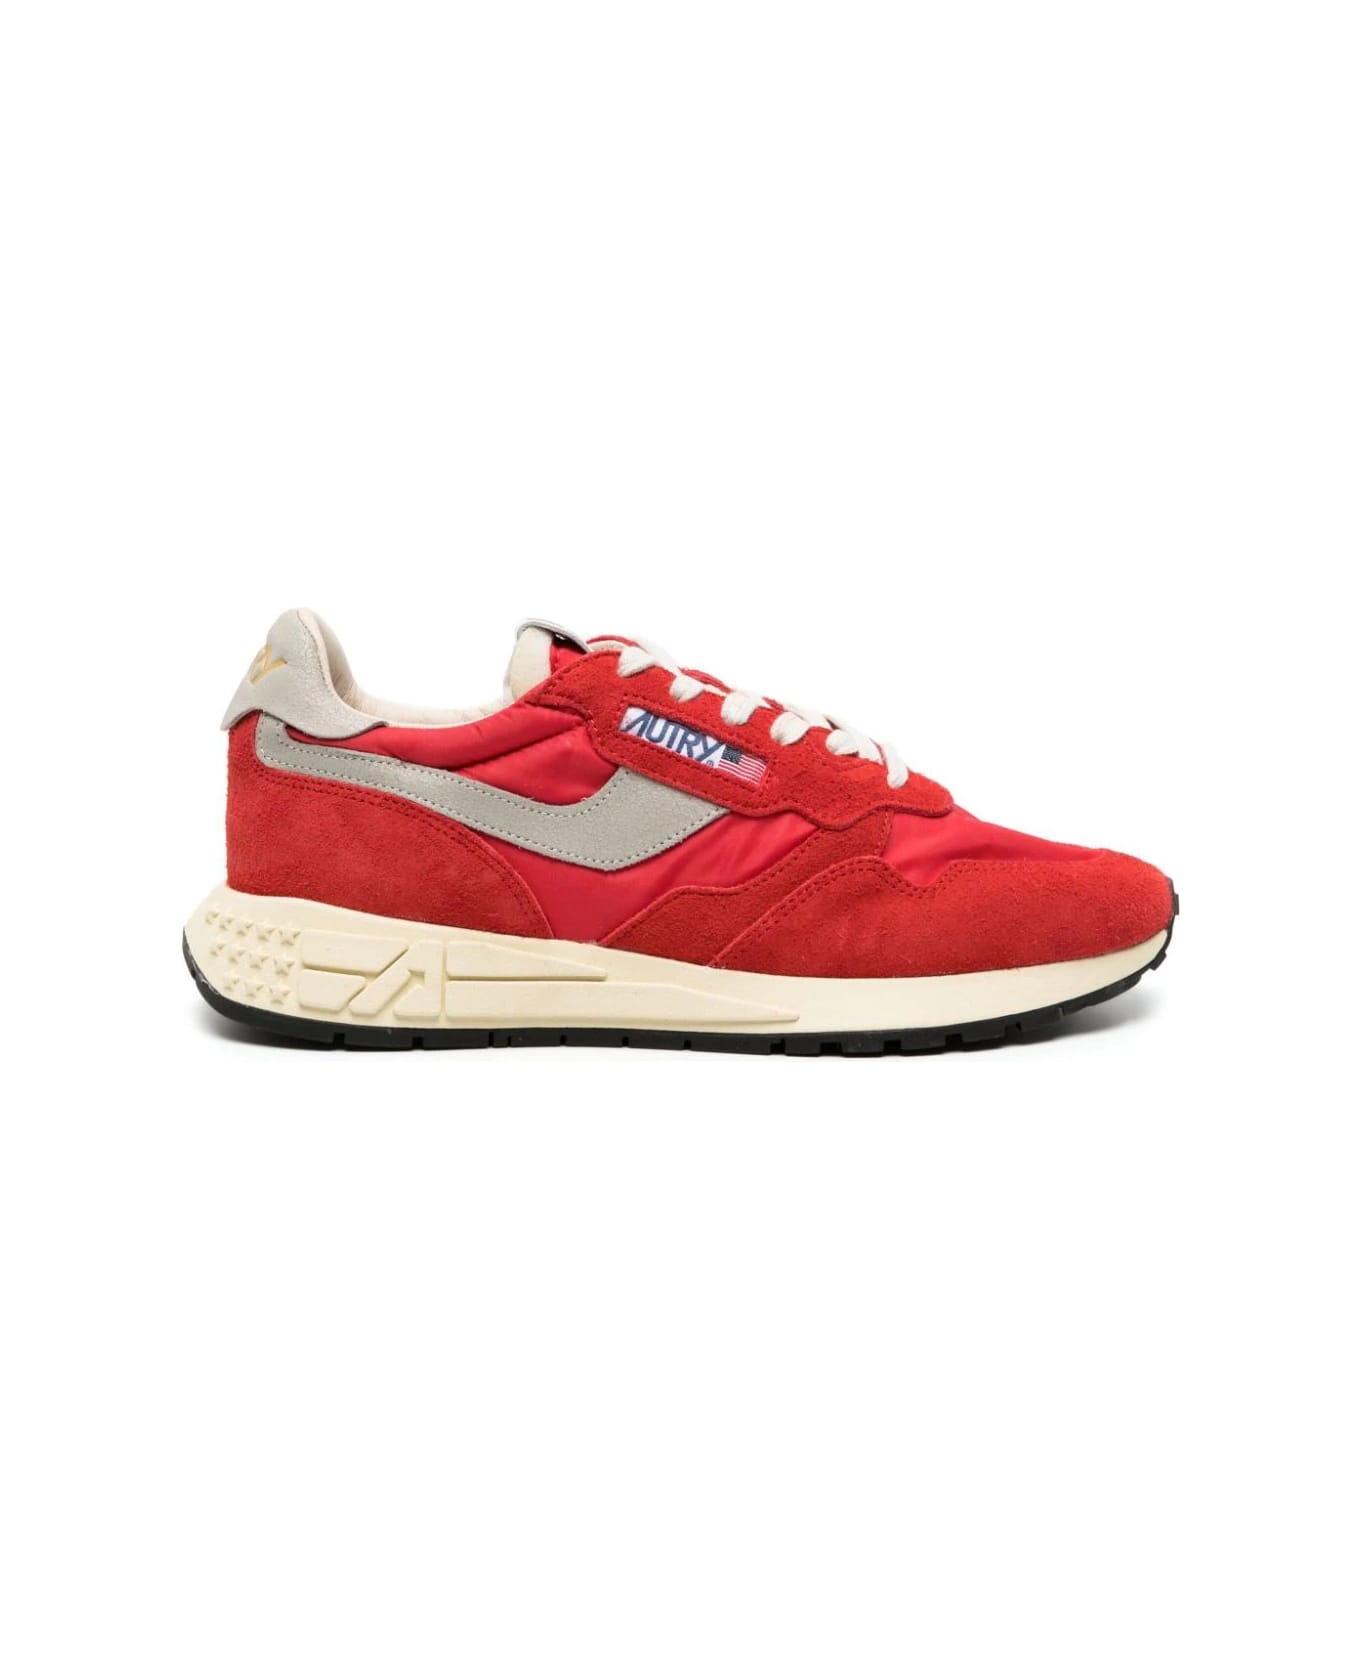 Autry Reelwind Low Nylon And Suede Sneakers - Red スニーカー